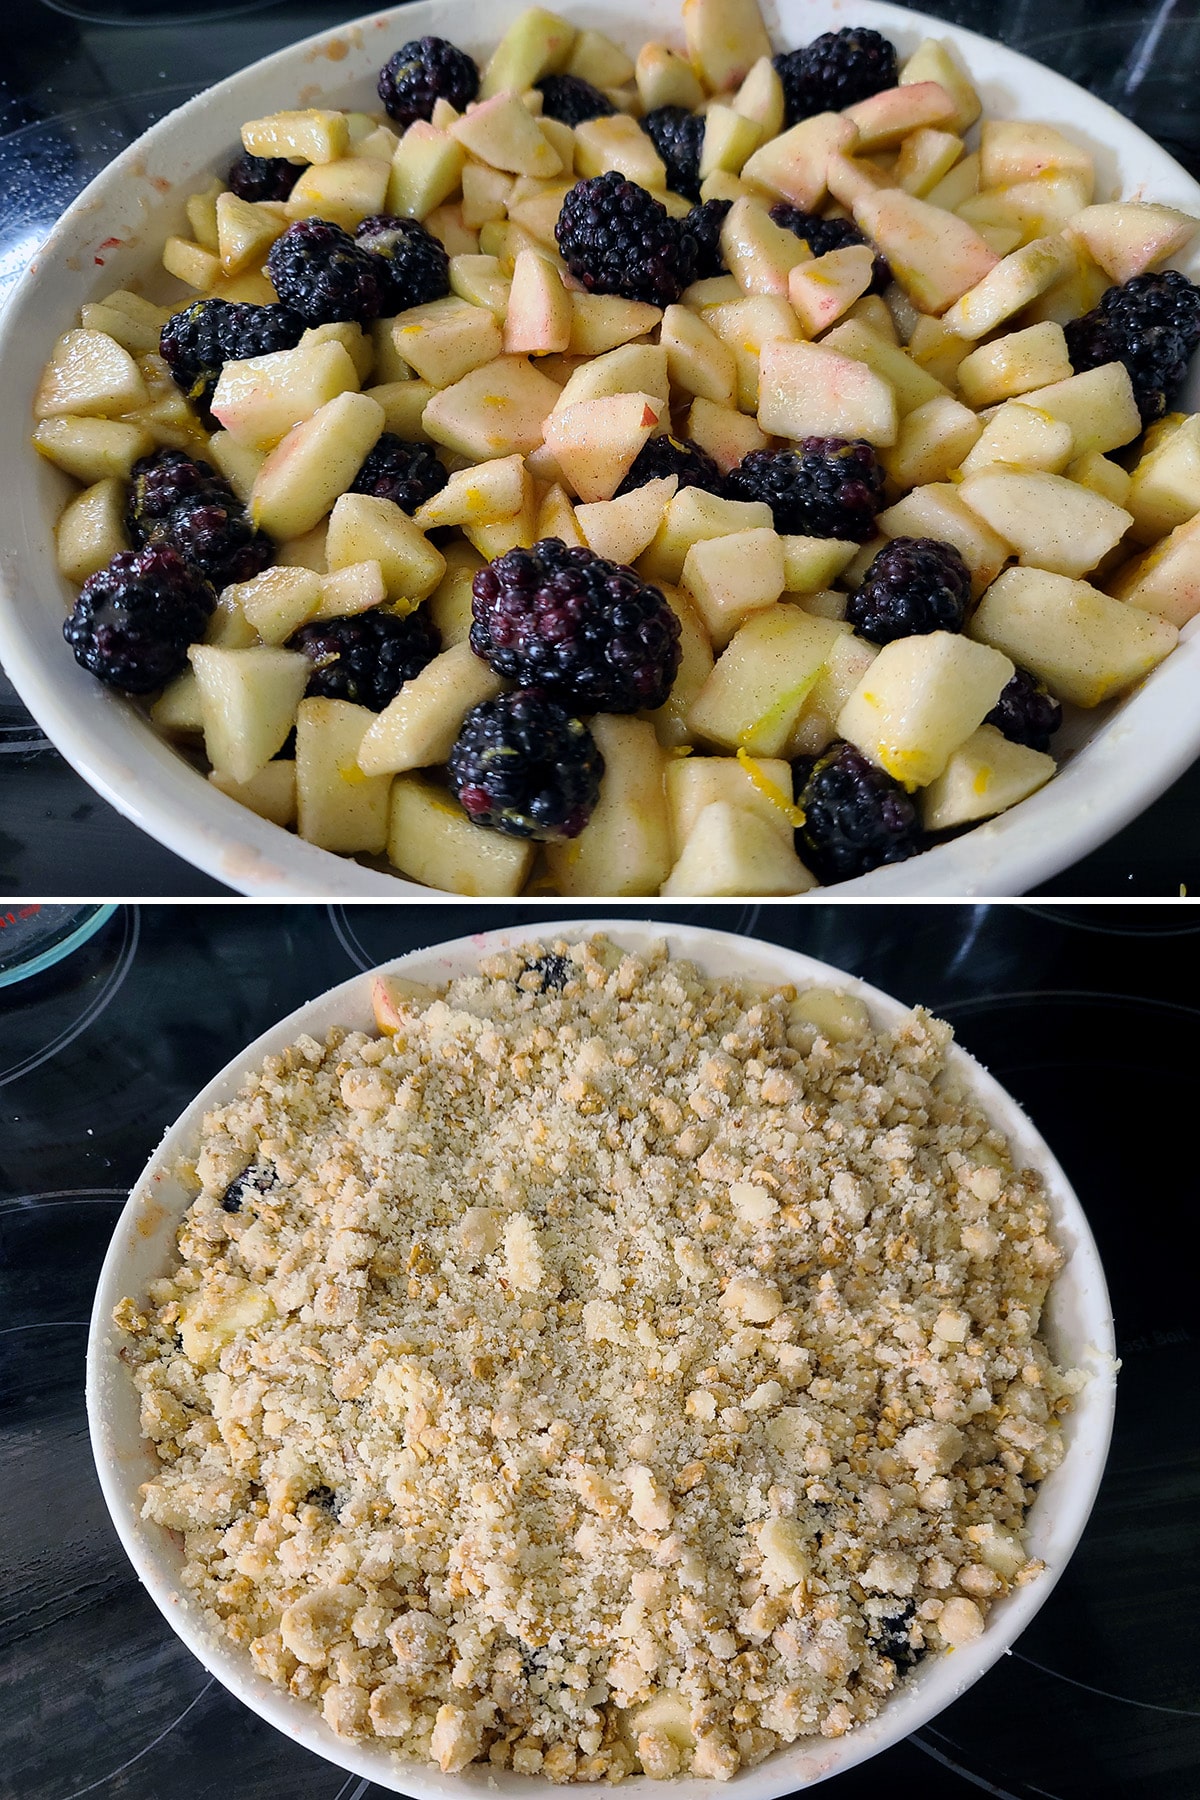 A two part image showing the apple and blackberry filling being spread in a round pan, and topped with the granola crumble topping.